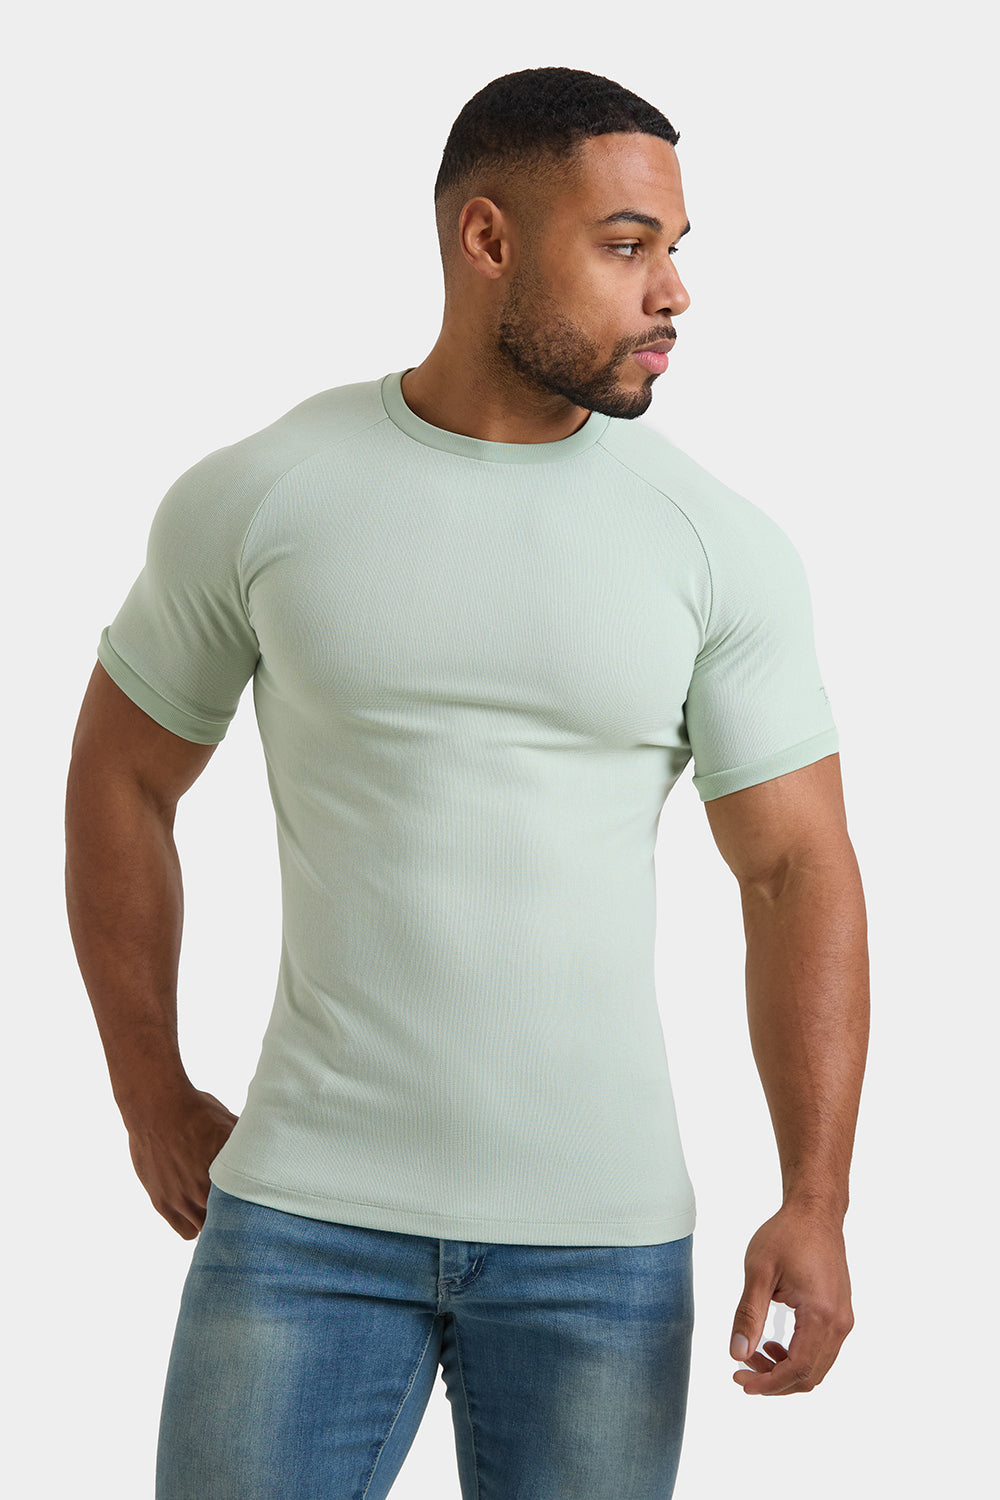 Textured Fashion T-Shirt in Mint - TAILORED ATHLETE - ROW